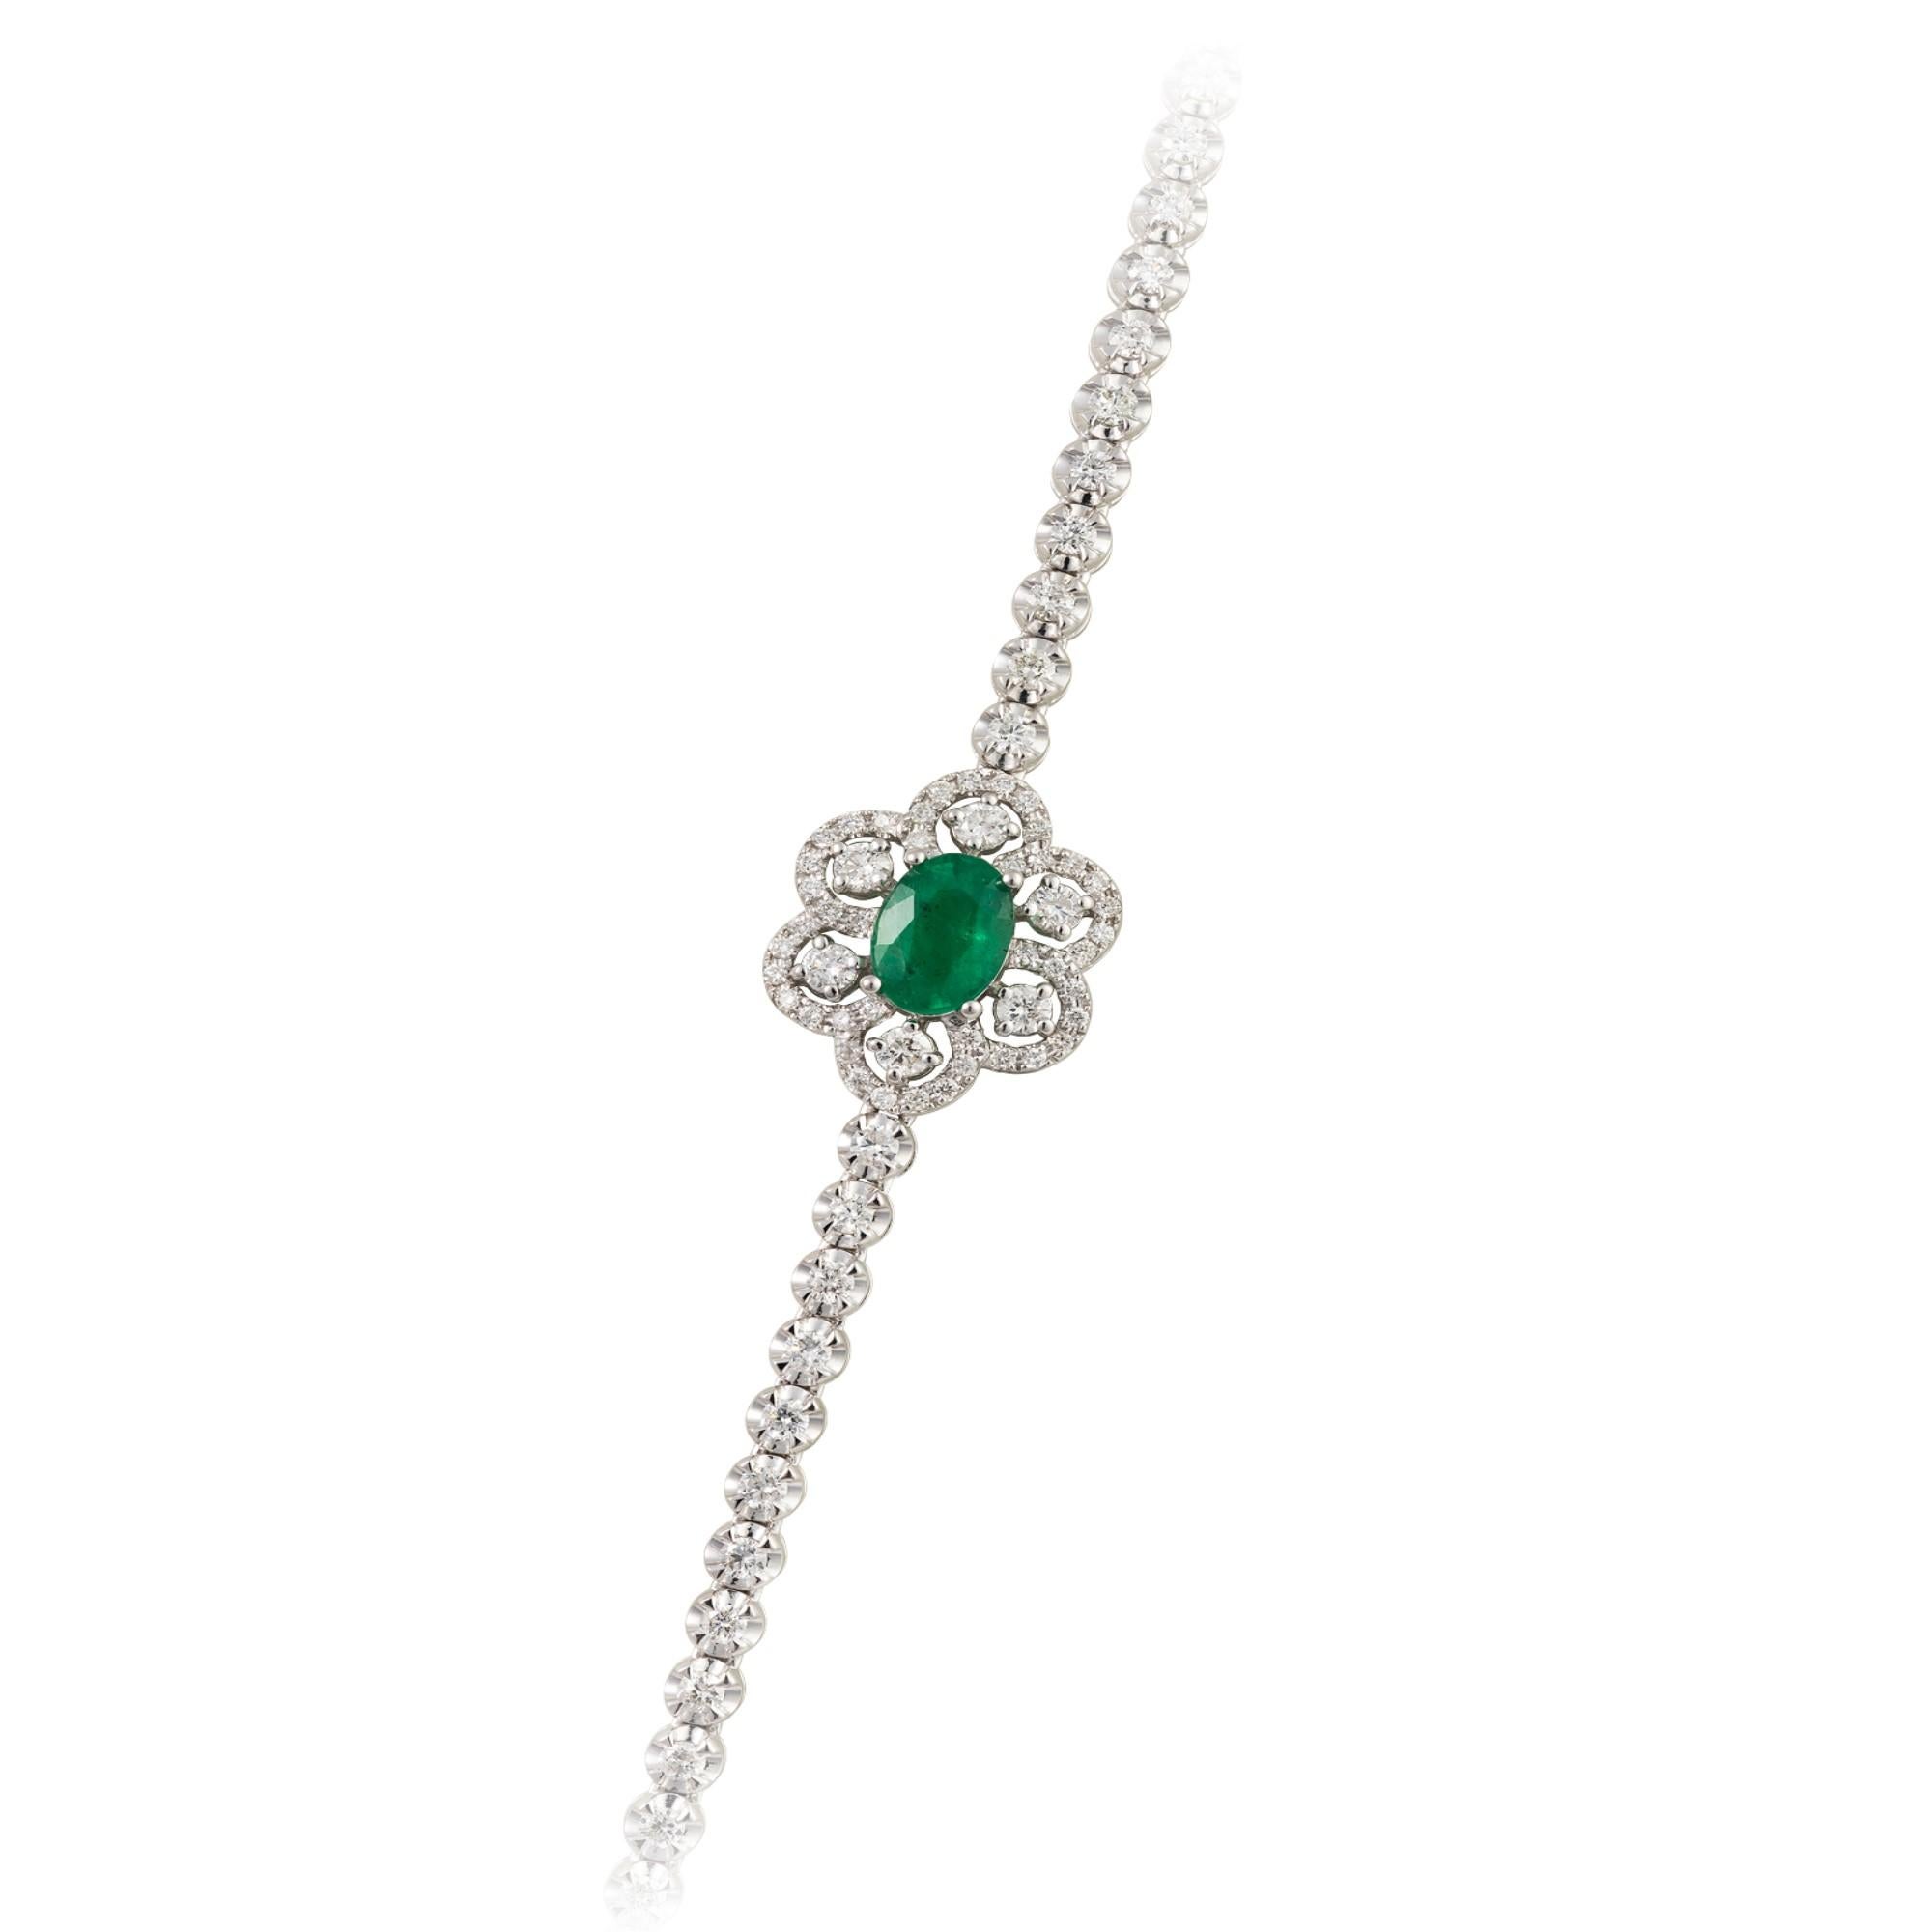 A Rare 18KT White Gold Emerald Diamond Necklace. Necklace is comprised of Finely Set Glittering Gorgeous Long Emerald Necklace adorned with Sparkling Diamonds!!! The Emeralds and Diamonds are of Exquisite and Fine Quality. T.C.W. approx 10CTS and